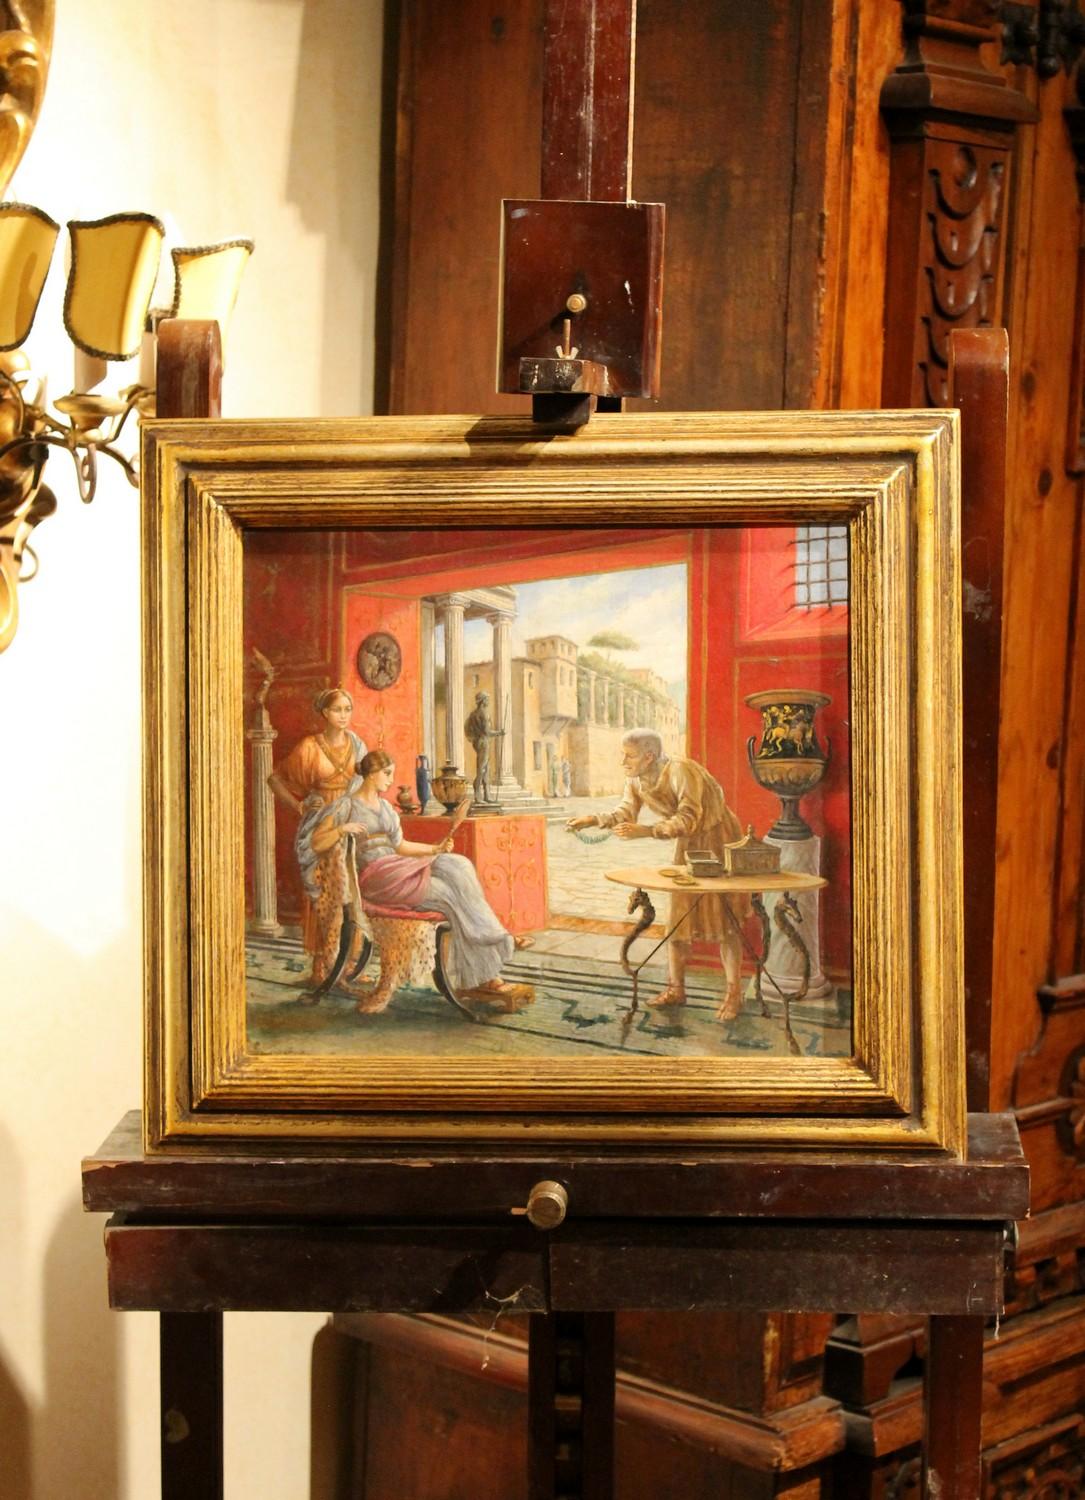 Italian 19th century oil on canvas painting neoclassical Pompeian interior scene
This pleasant turn of the century (late 19th century-early 20th century) oil on canvas painting depicts a scene of an opulent interior in full ancient neoclassical